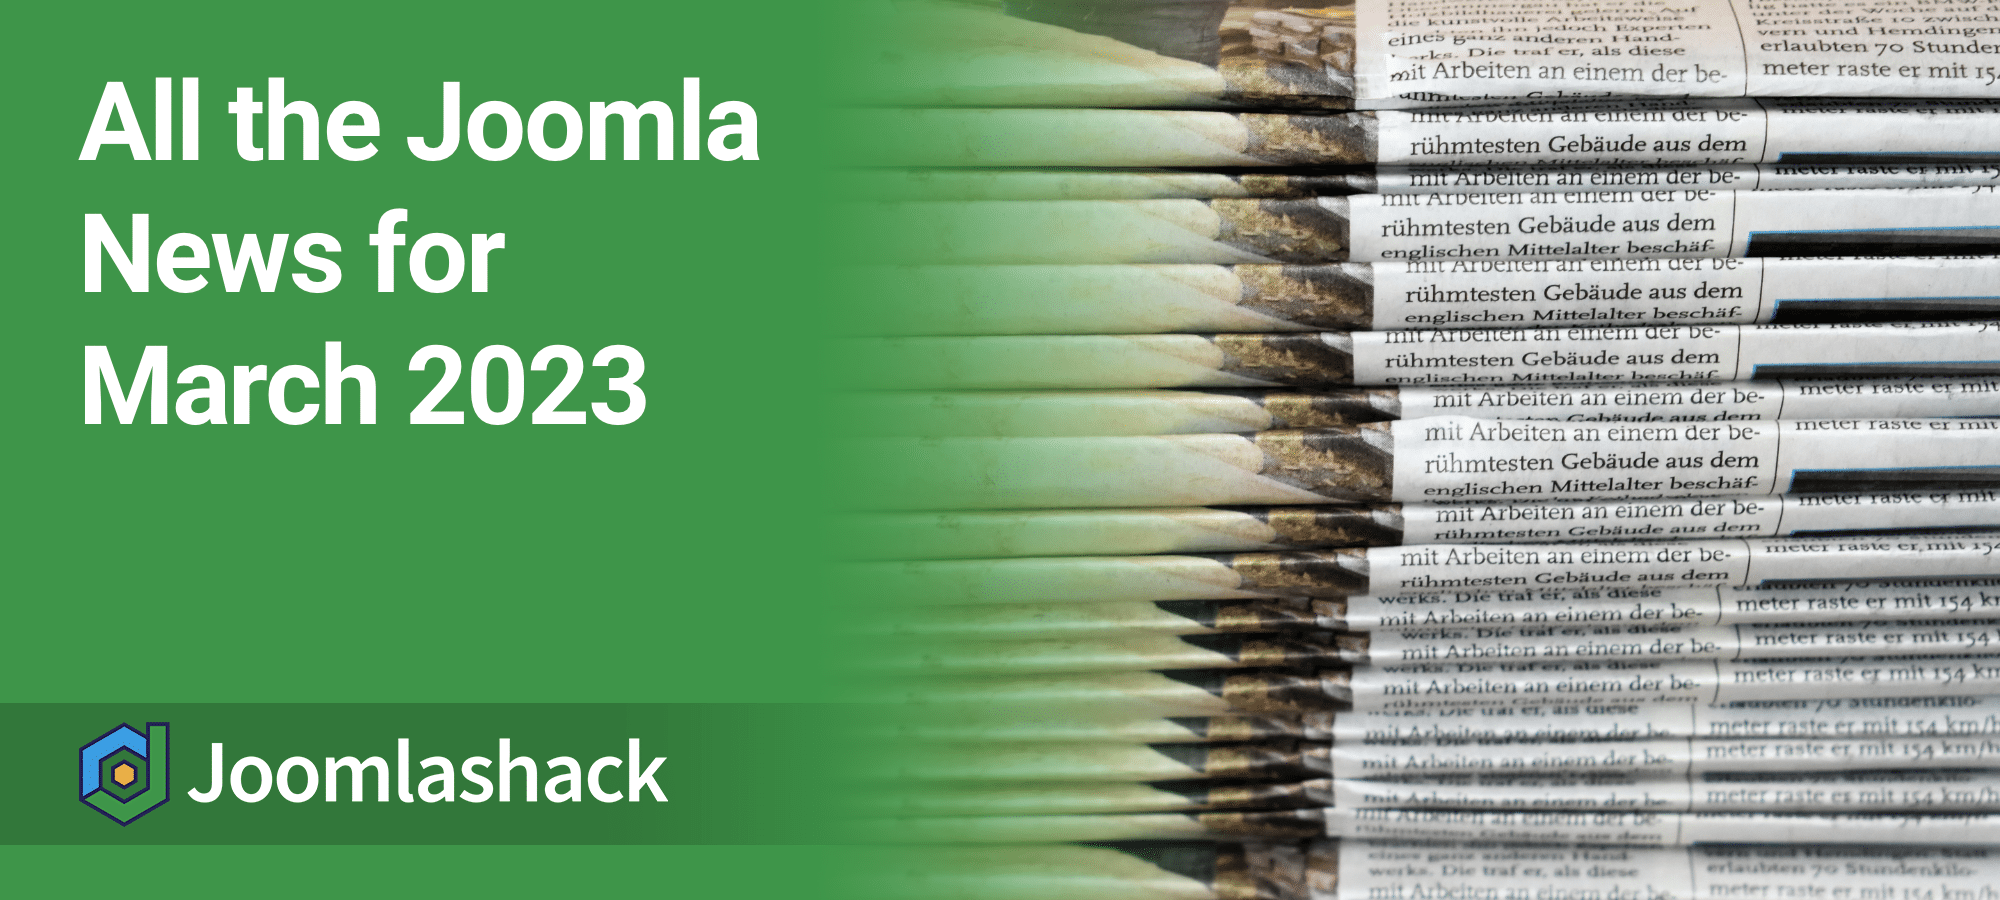 All the Joomla News for March 2023